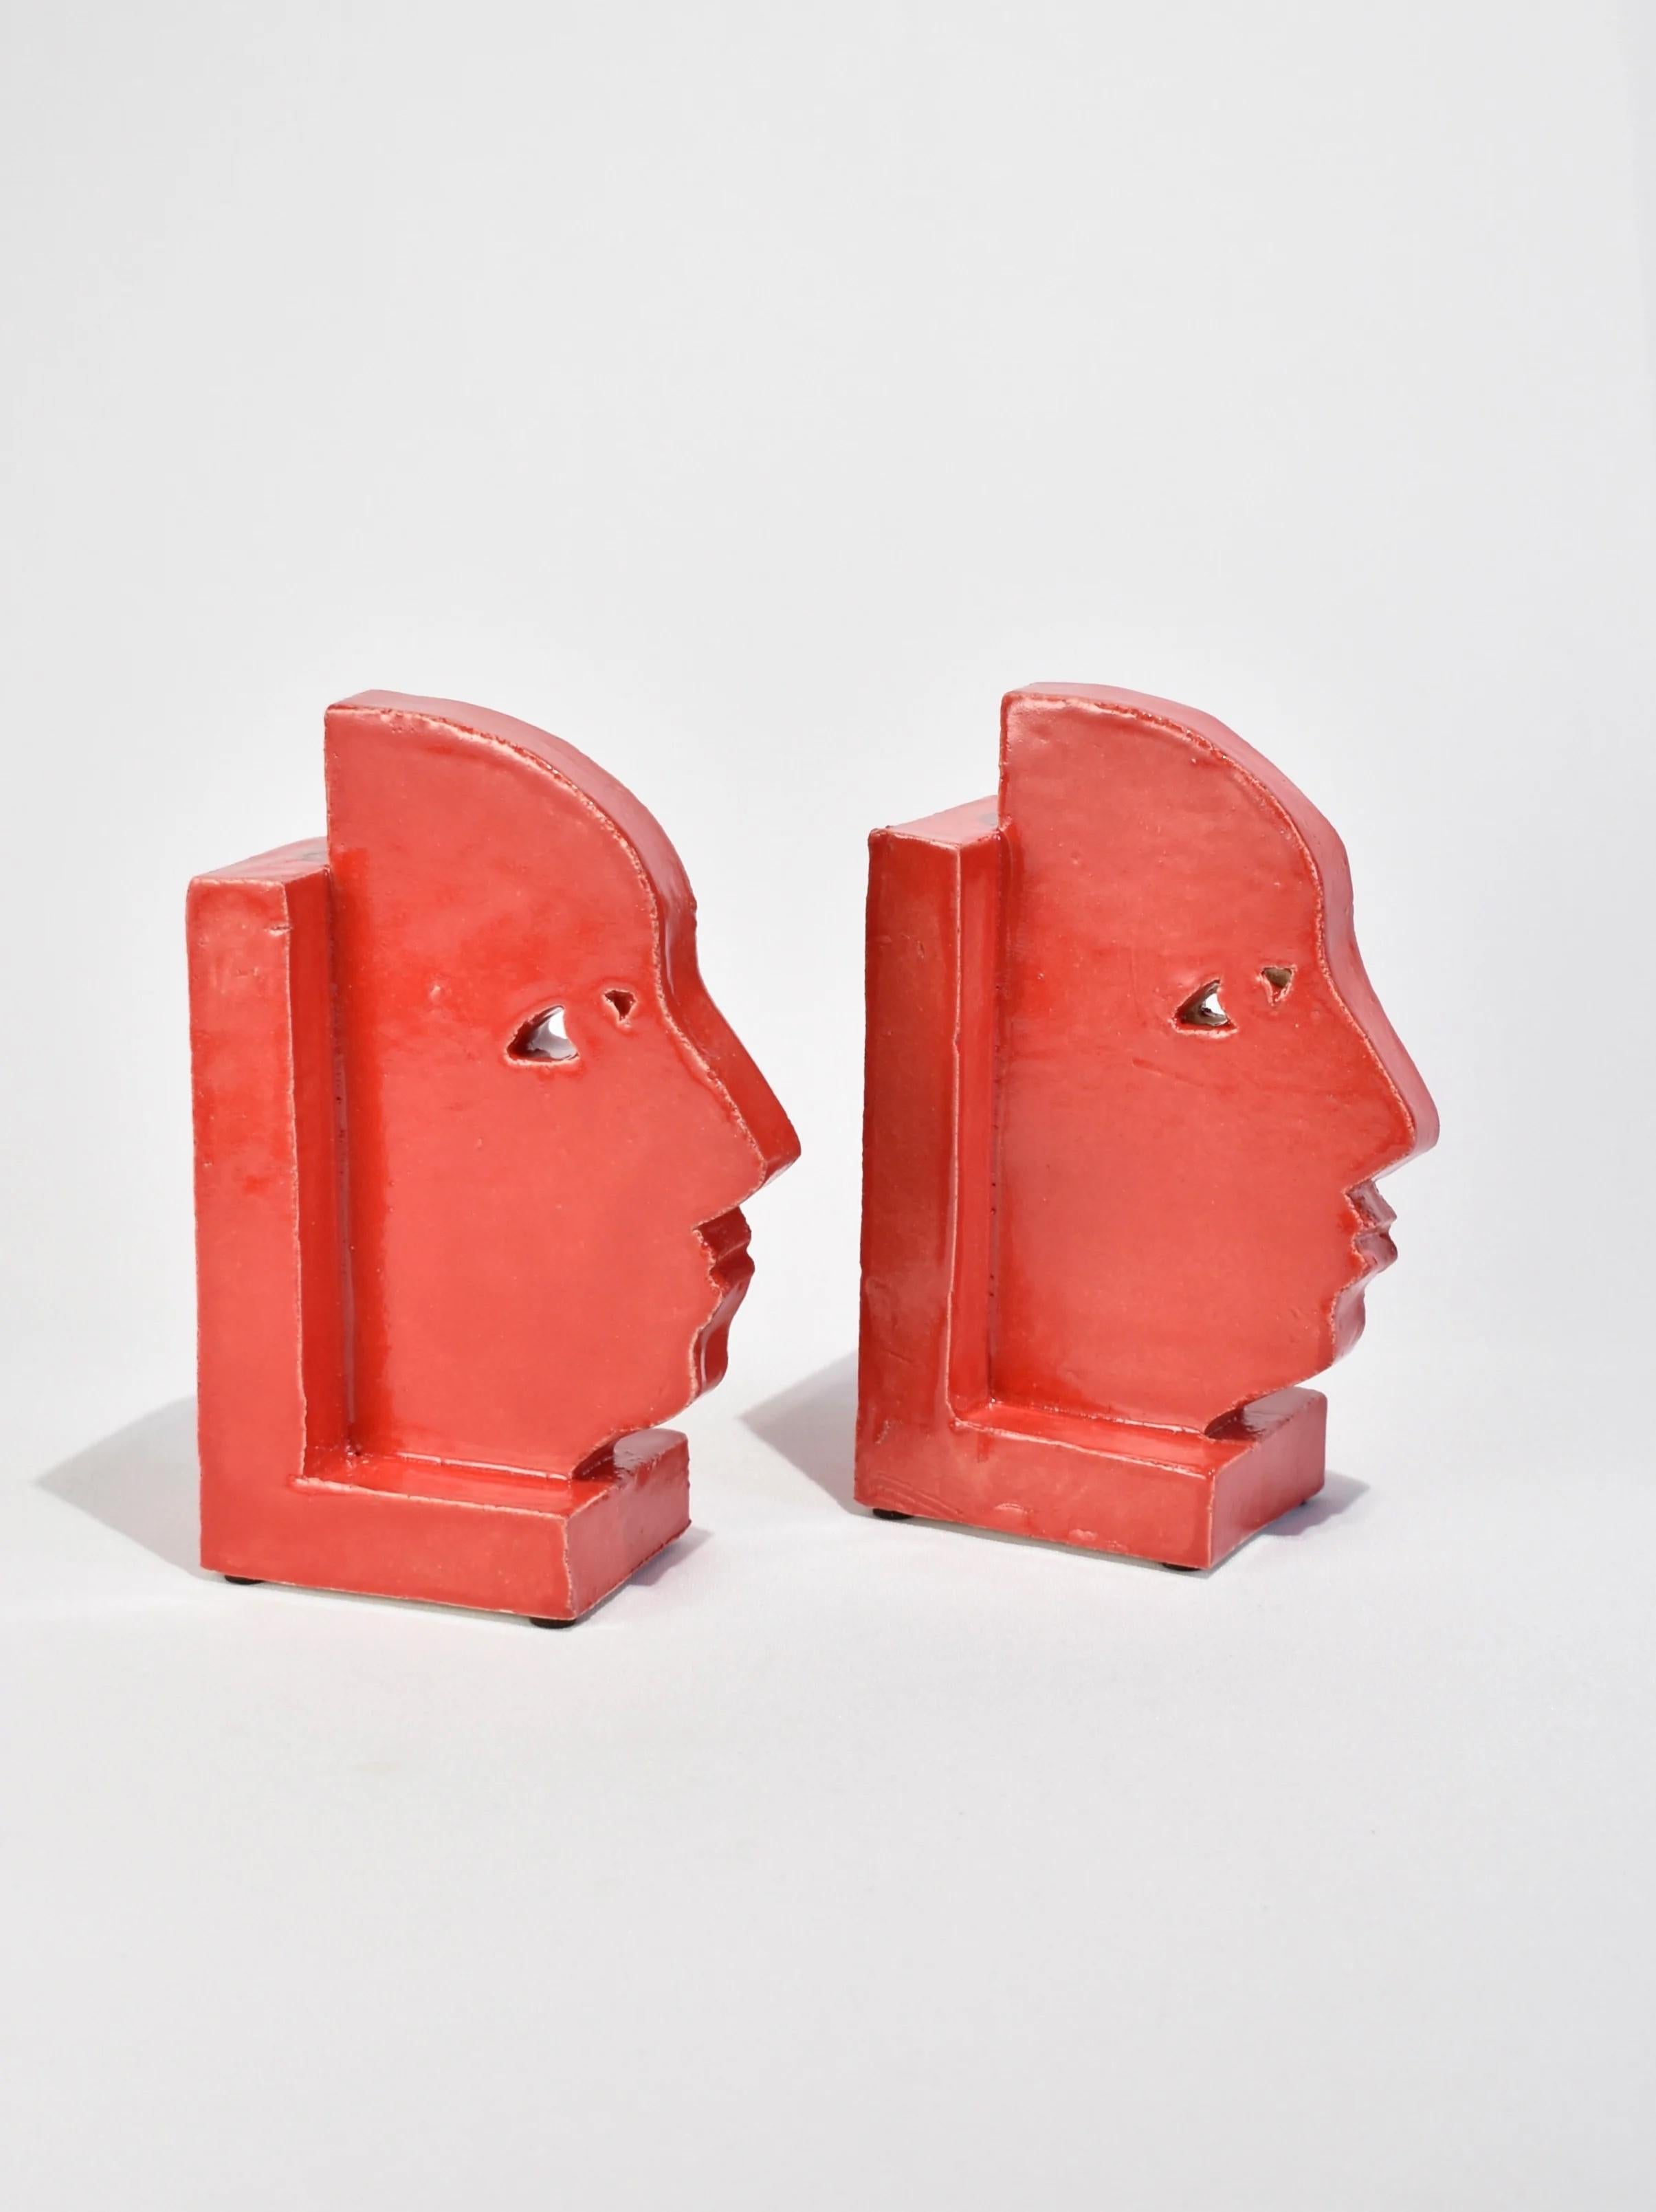 Handmade slab-built bookends with a face profile design in red, set of two. By Shane Gabier, made in NYC.

Please note that this item is handmade and therefore unique; slight variations in color and shape are to be expected.